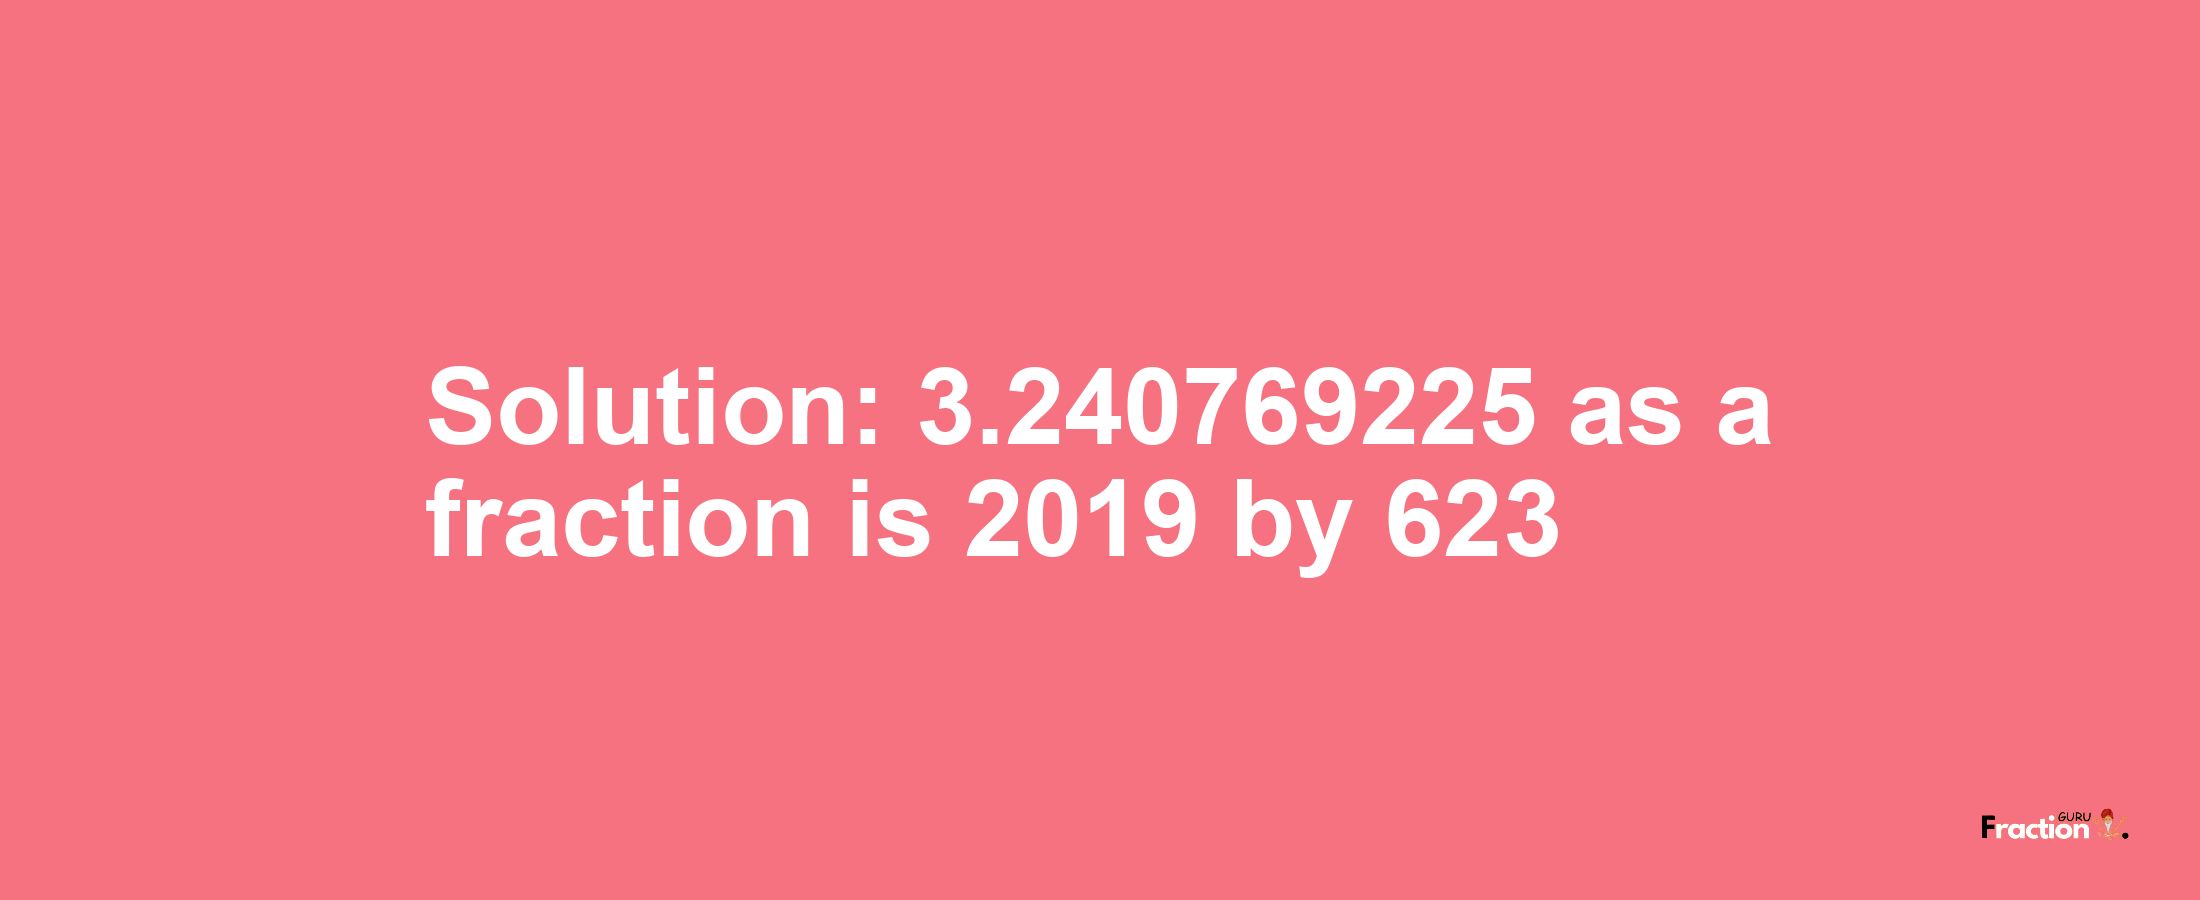 Solution:3.240769225 as a fraction is 2019/623